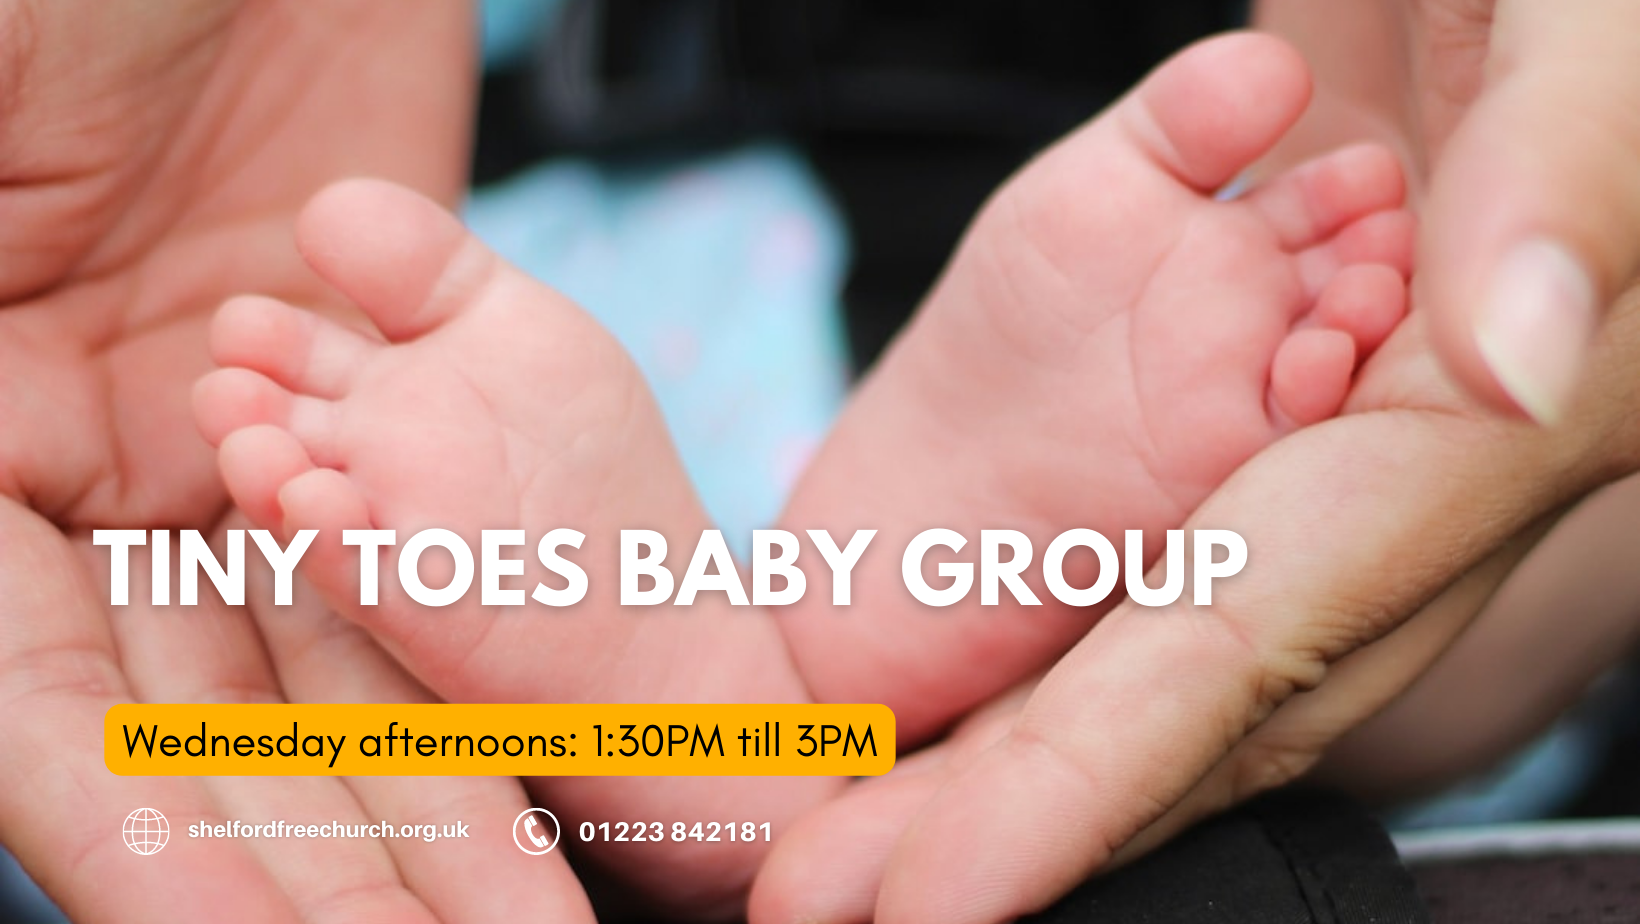 Tiny toes baby group